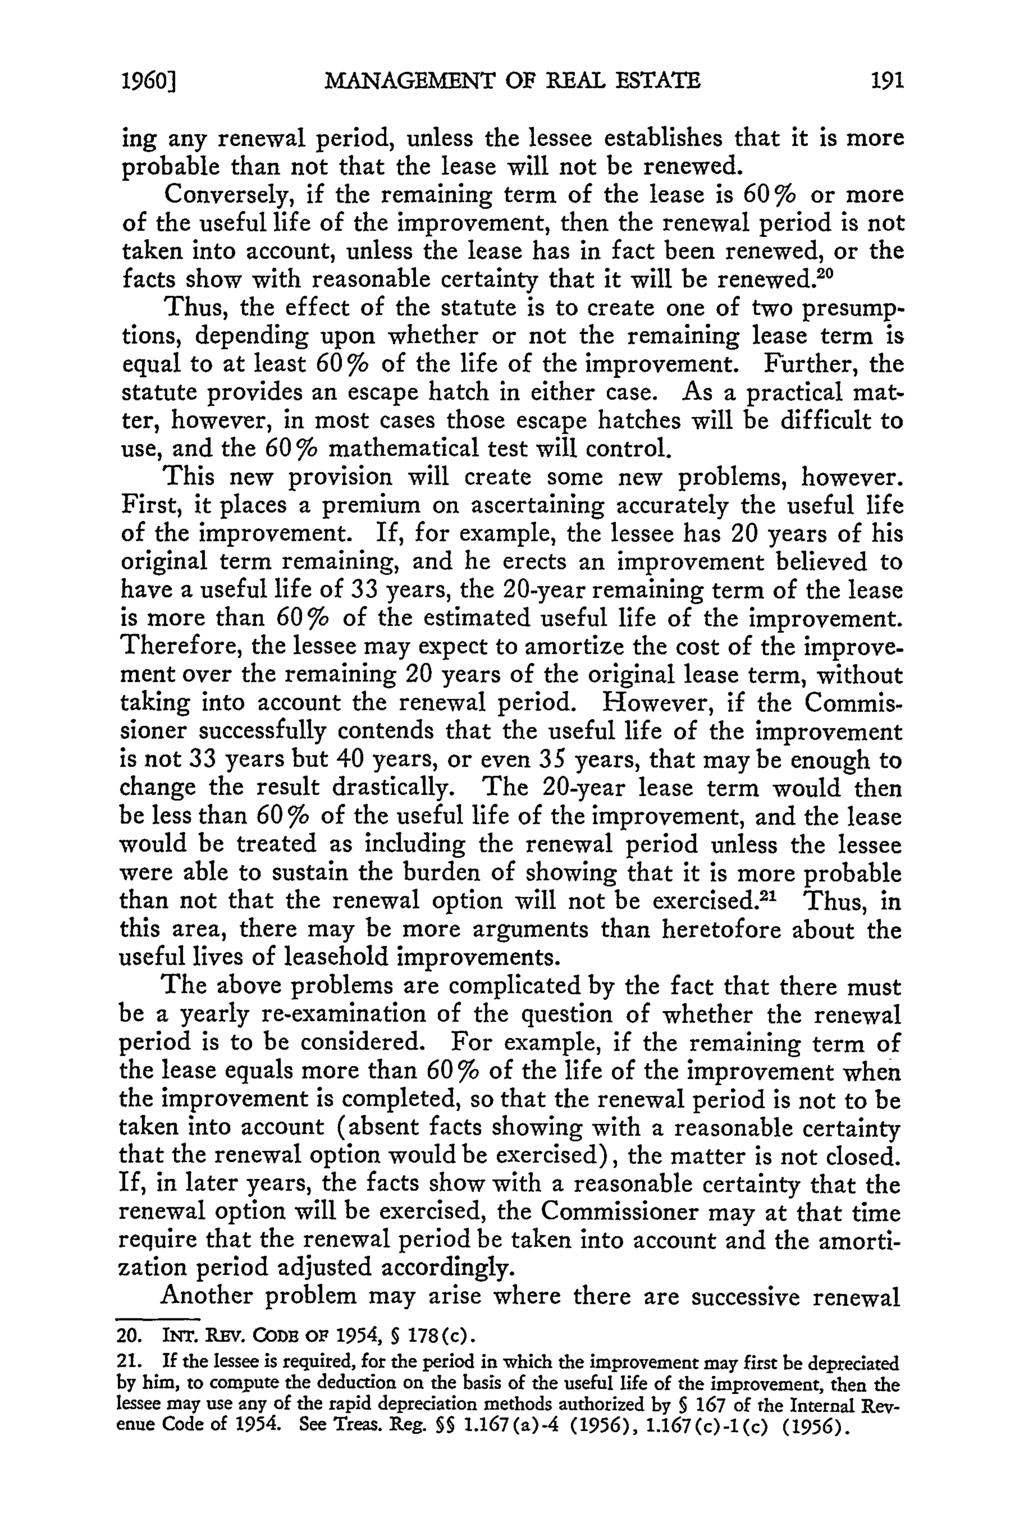 1960] MANAGEIIENT OF REAL ESTATE ing any renewal period, unless the lessee establishes that it is more probable than not that the lease will not be renewed.